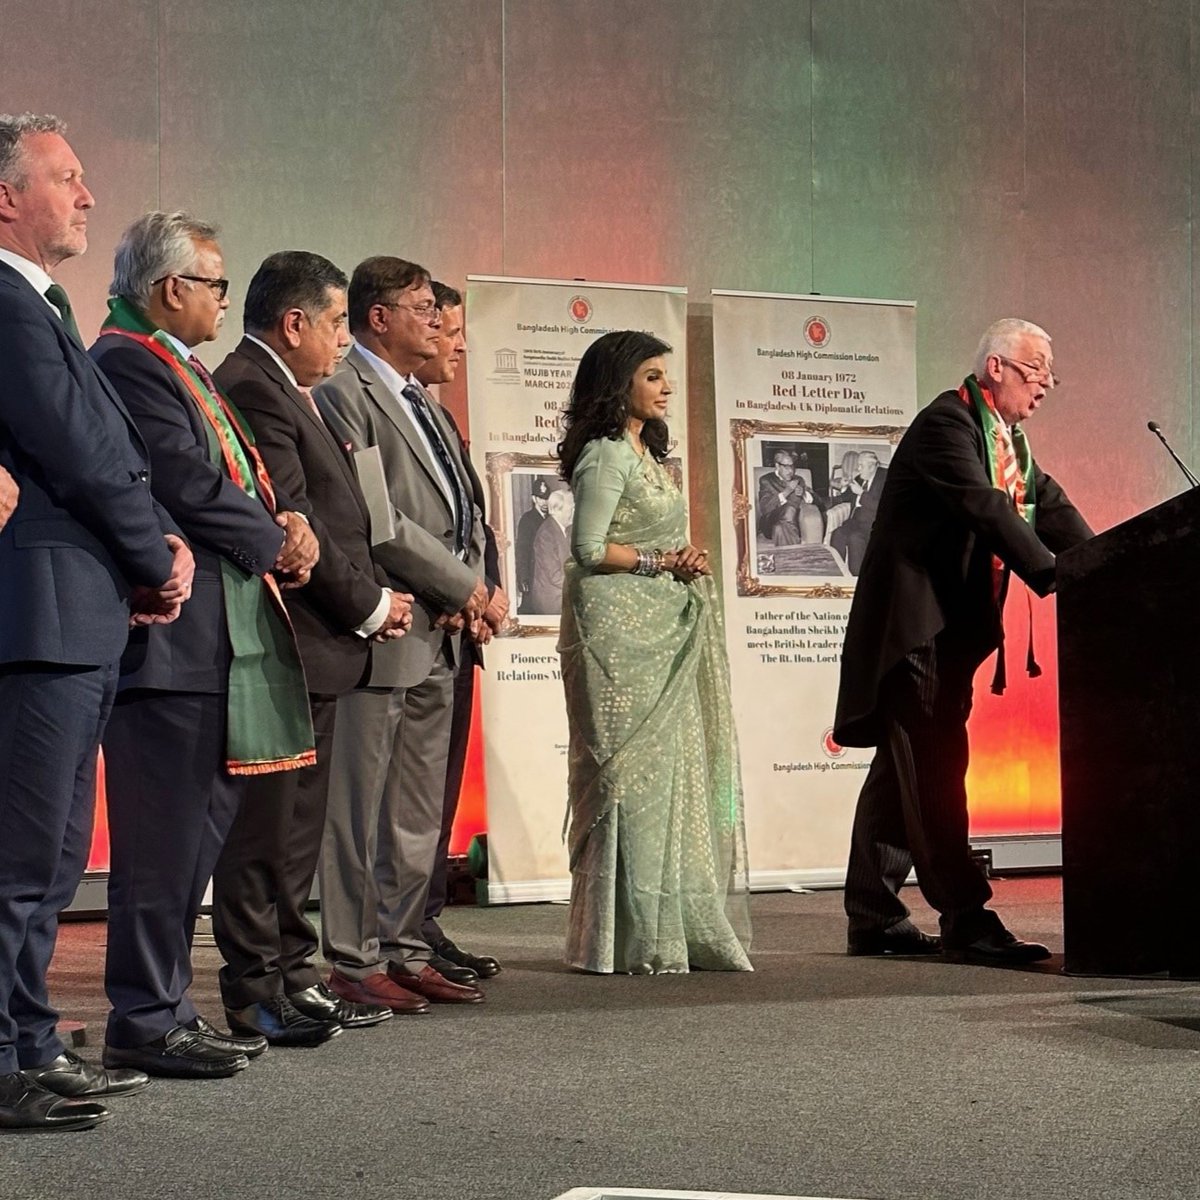 I was honoured to be invited by HE @MunaTasneem to speak last night in marking the 54th Bangladesh Independence Day. It was a privilege to celebrate with the community here in the UK.